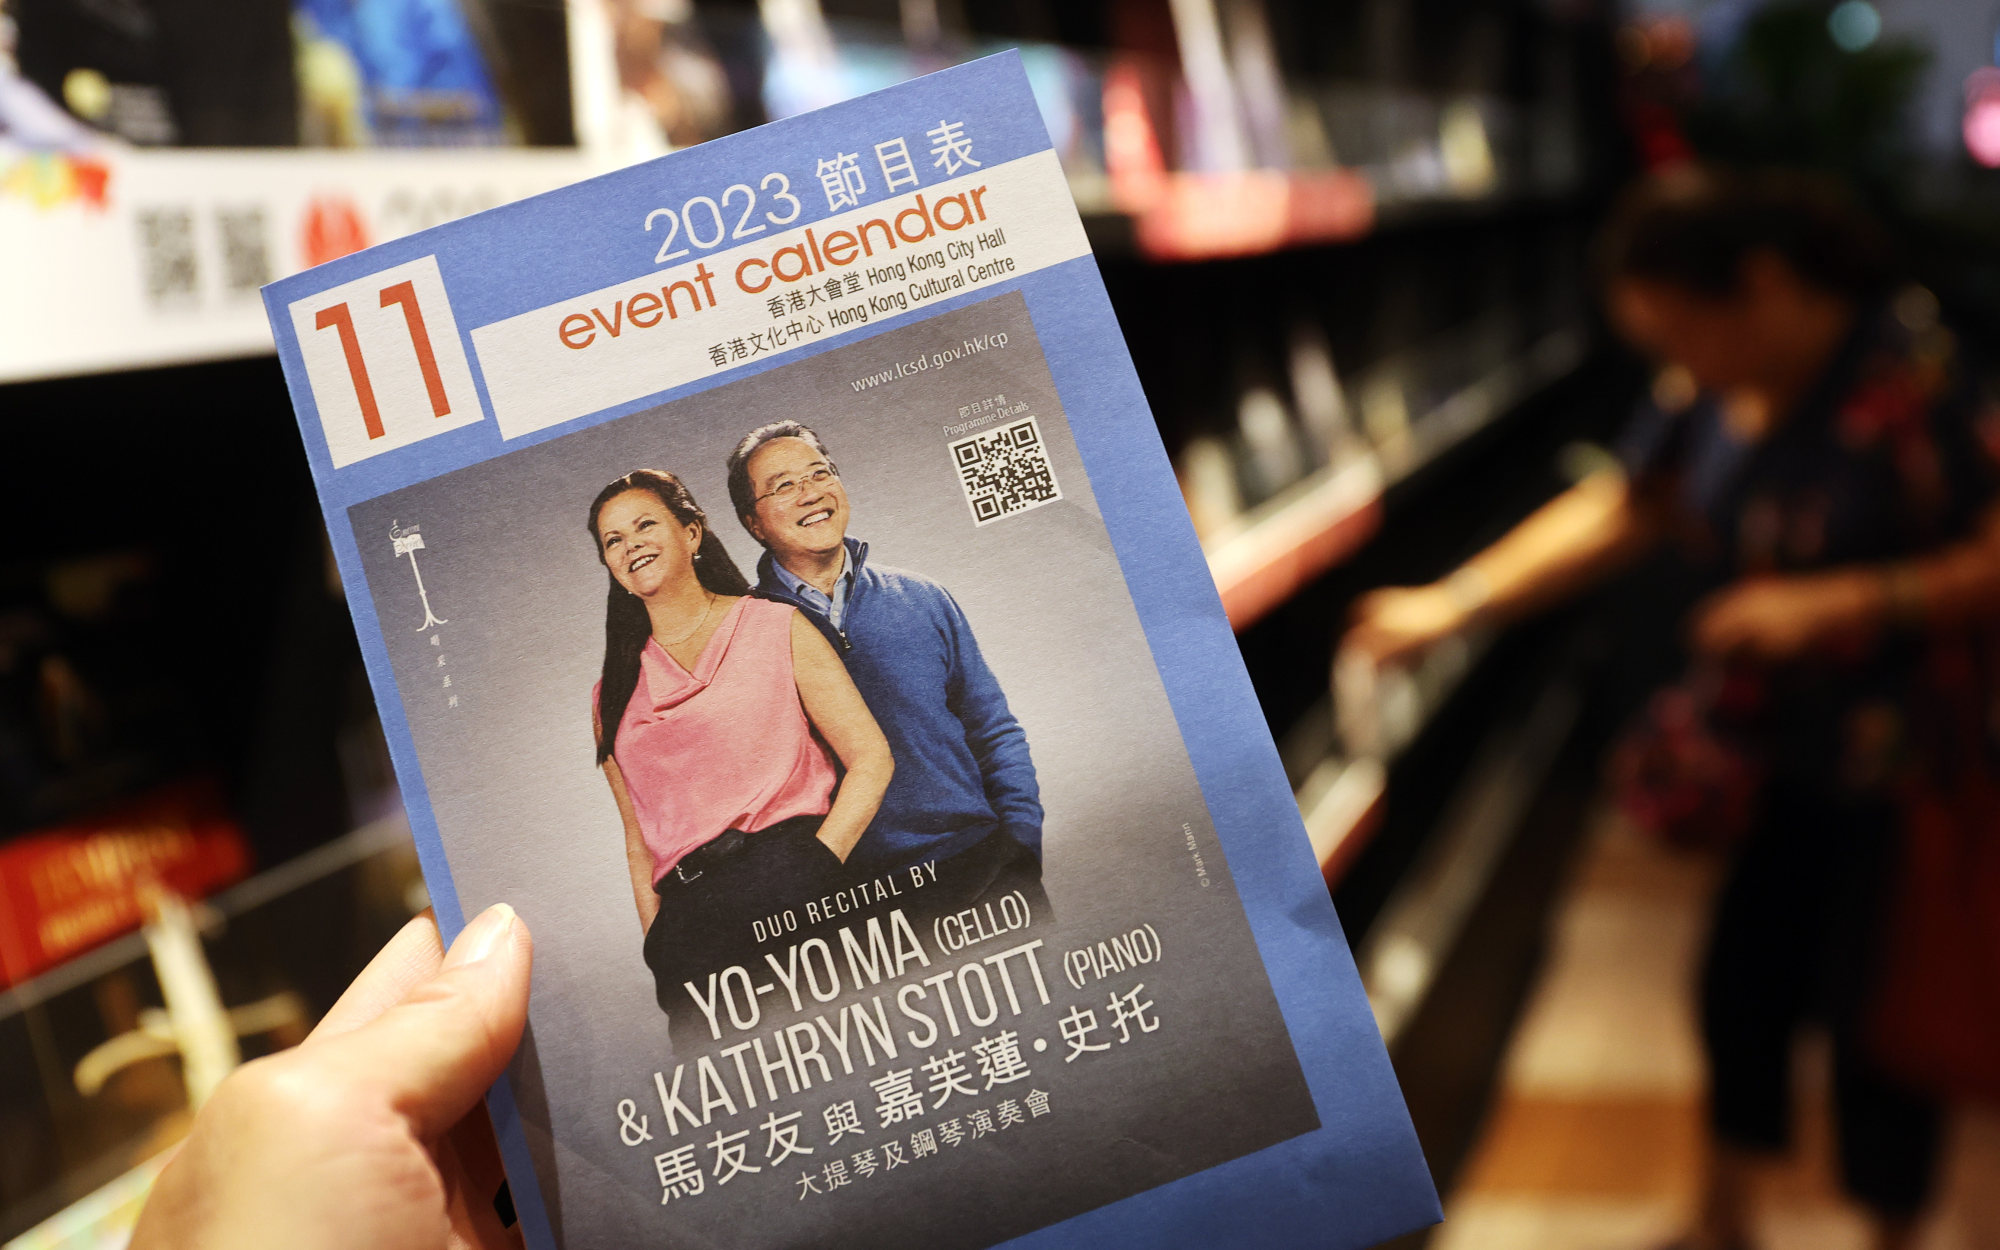 Leaflets of the coming recital by the pair at the Culture Centre in Tsim Sha Tsui. Photo: Edmond So